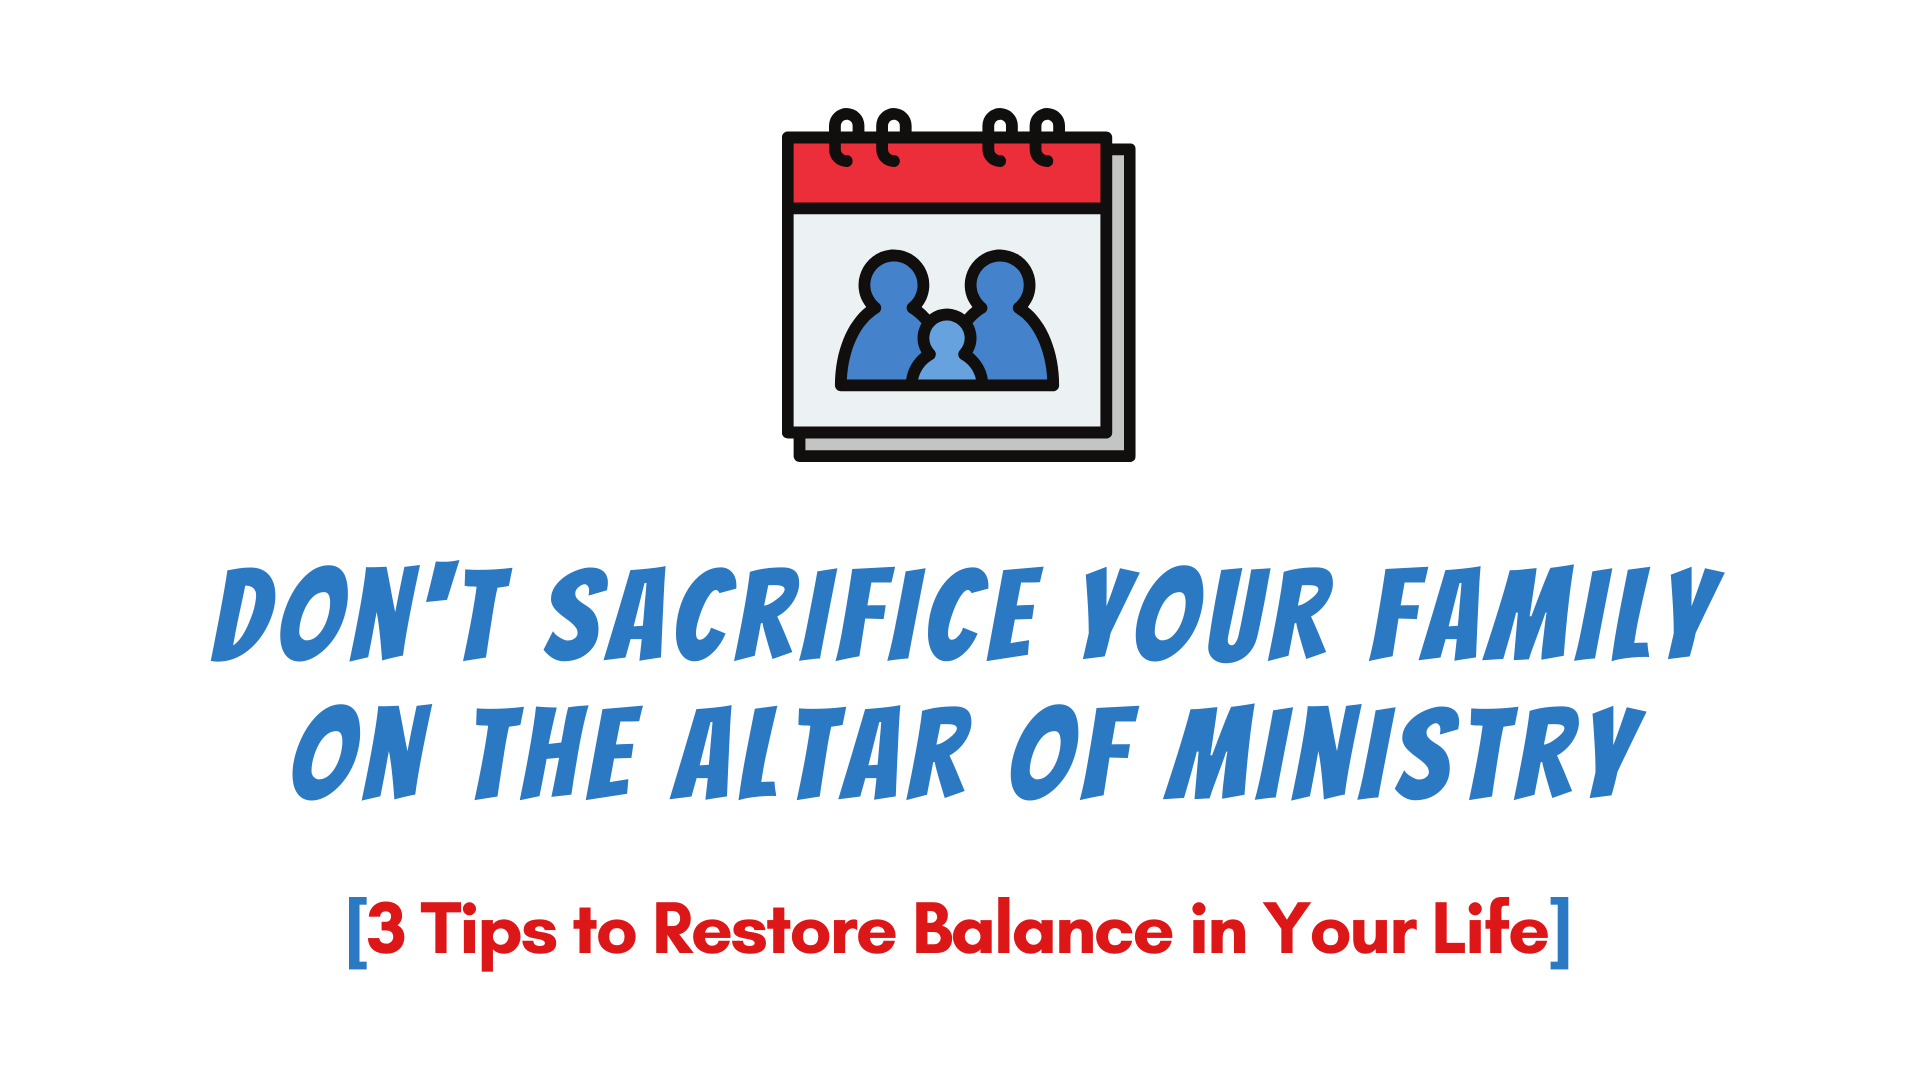 Don't sacrifice your family on the altar of ministry (3 tips from Choosing to Cheat by Andy Stanley)